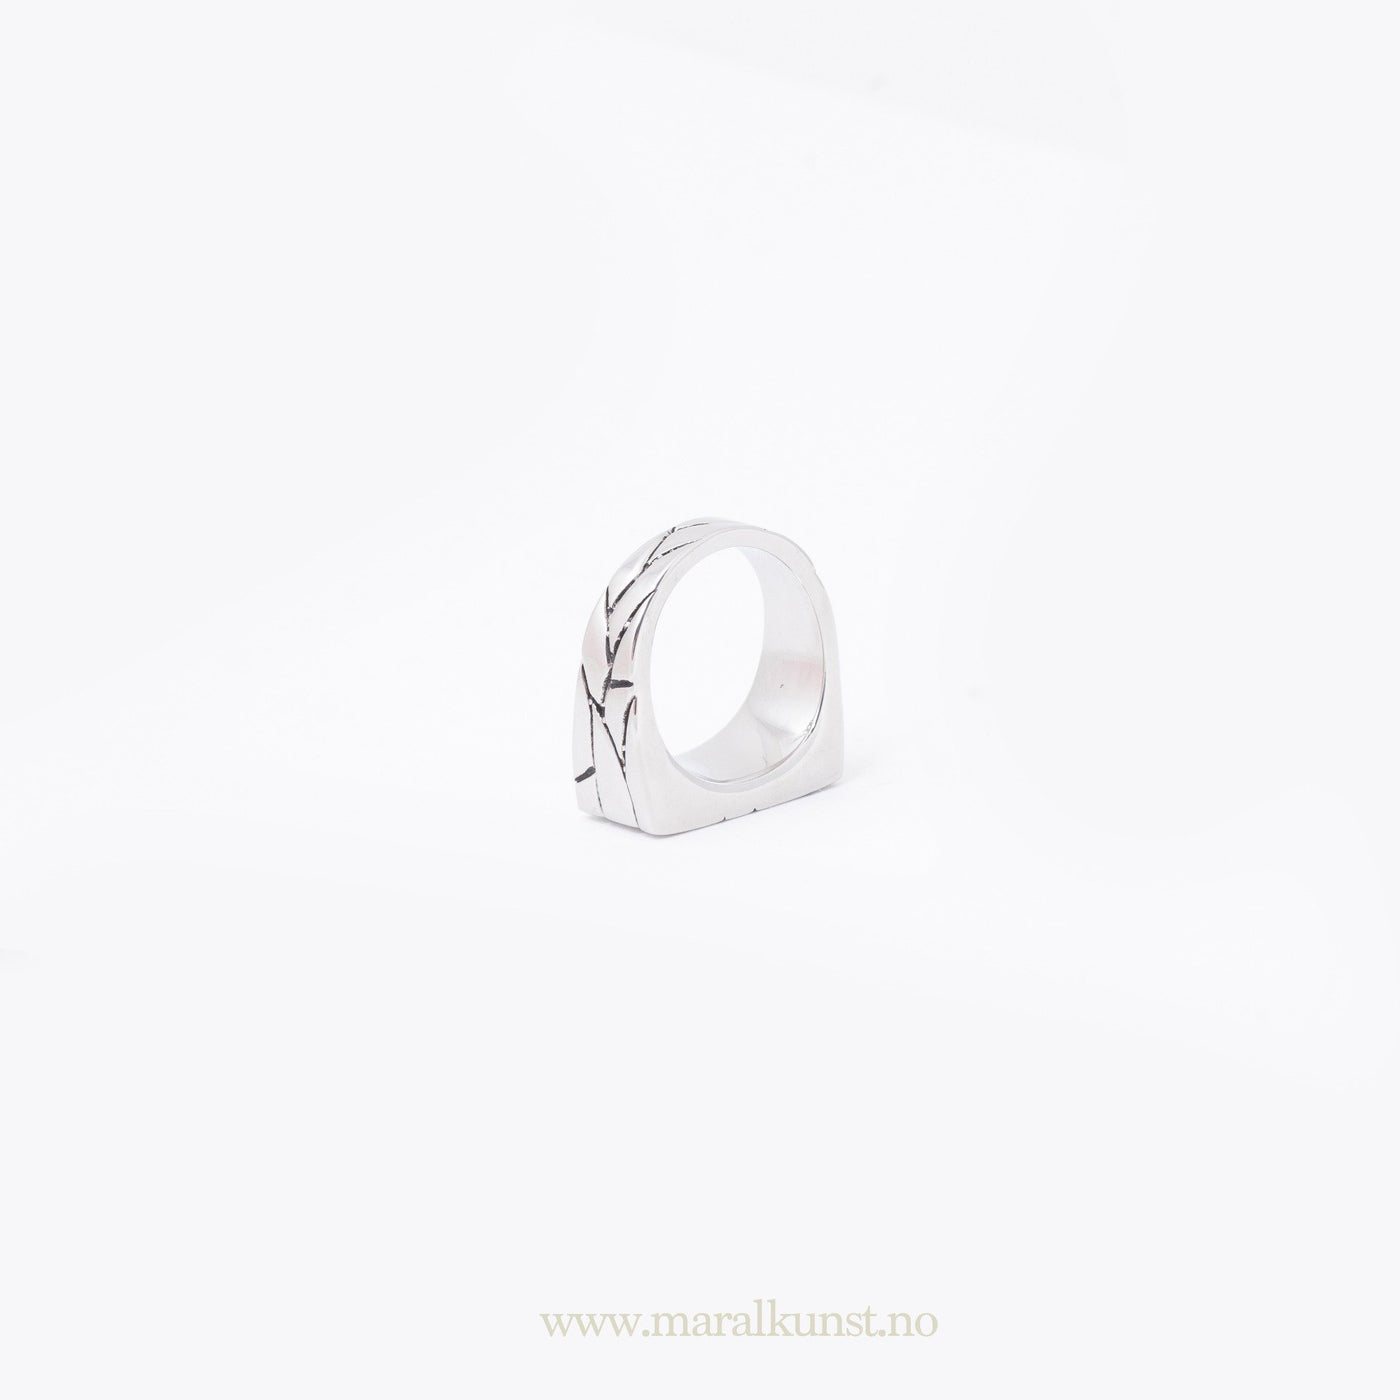 Texture Ring - Maral Kunst Jewelry